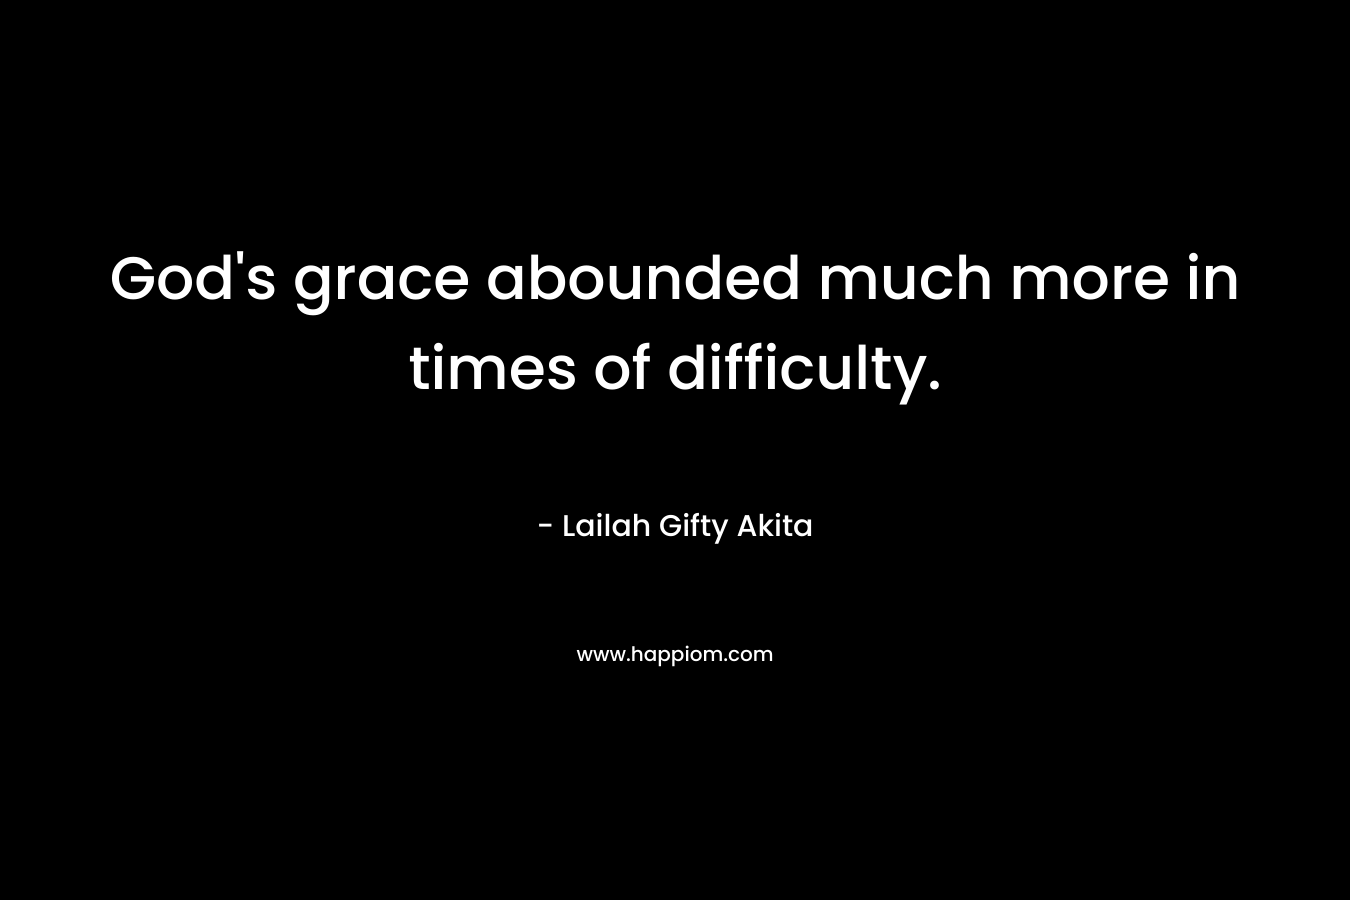 God's grace abounded much more in times of difficulty.